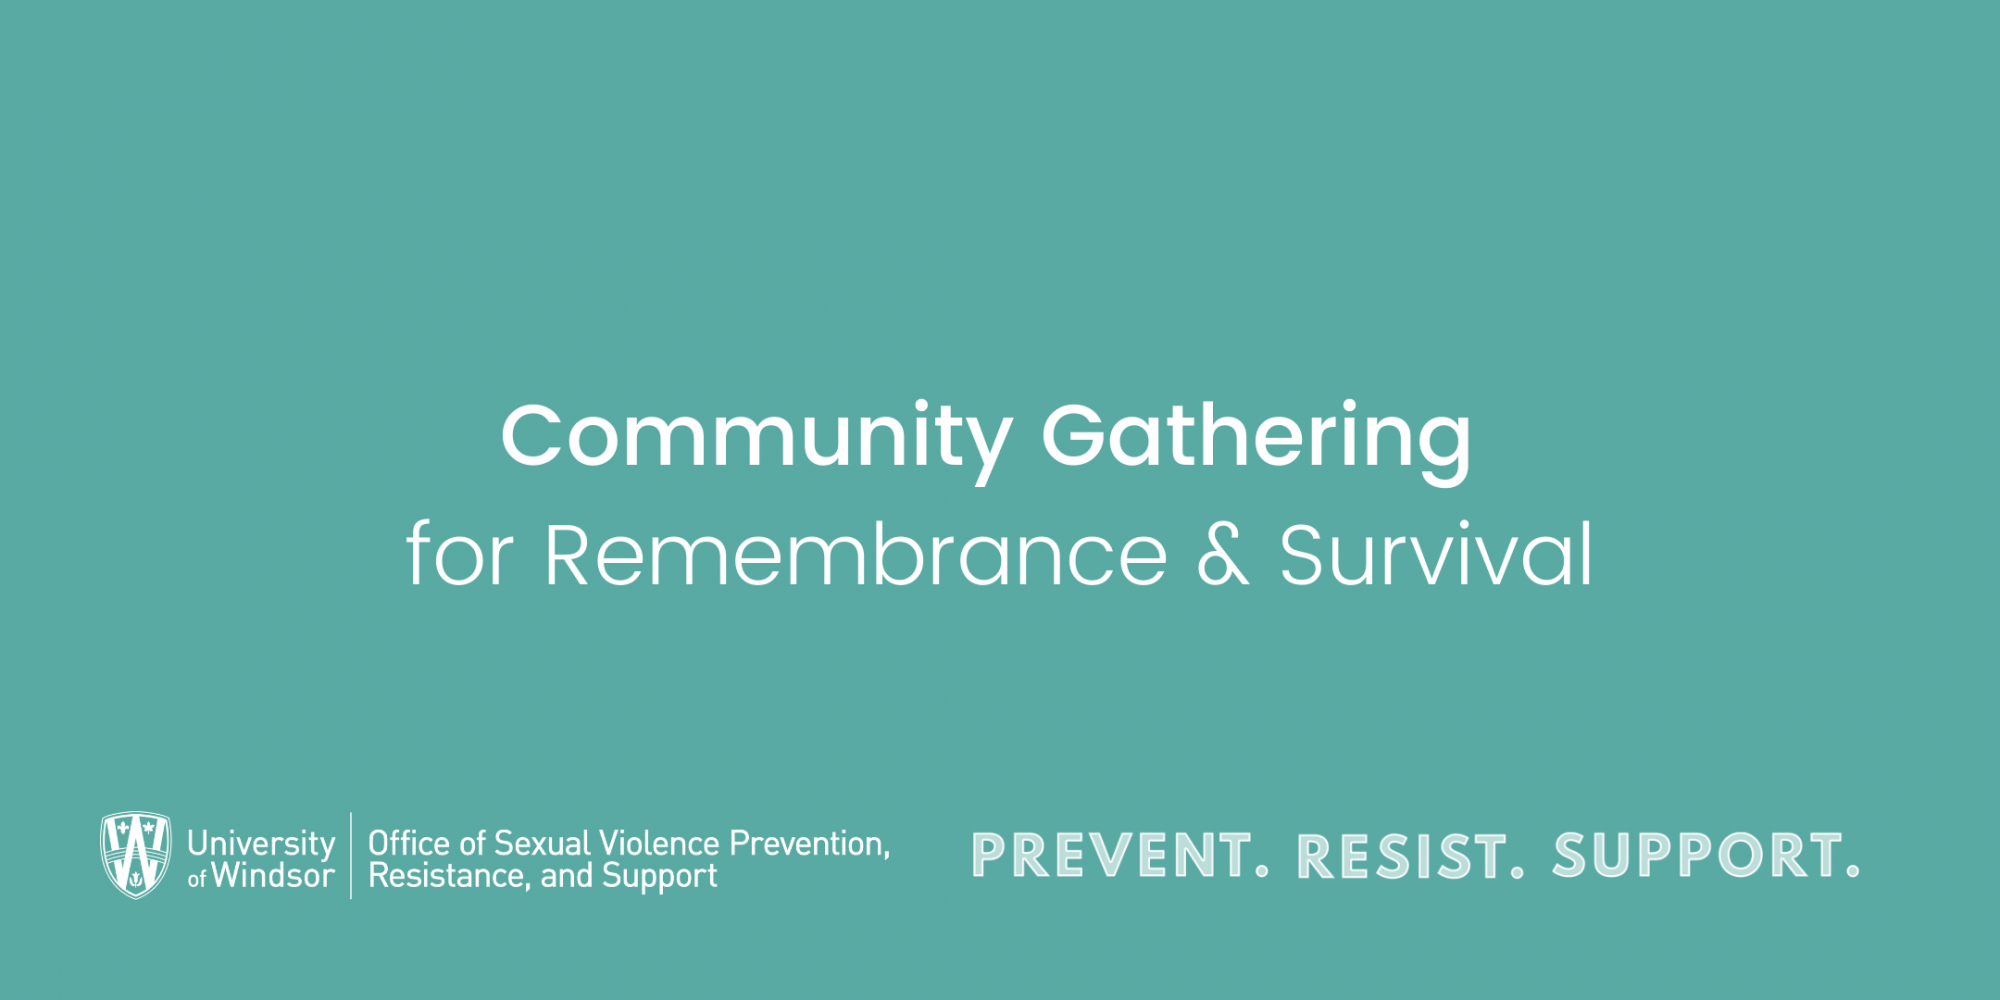 Community Gathering for Remembrance & Survival